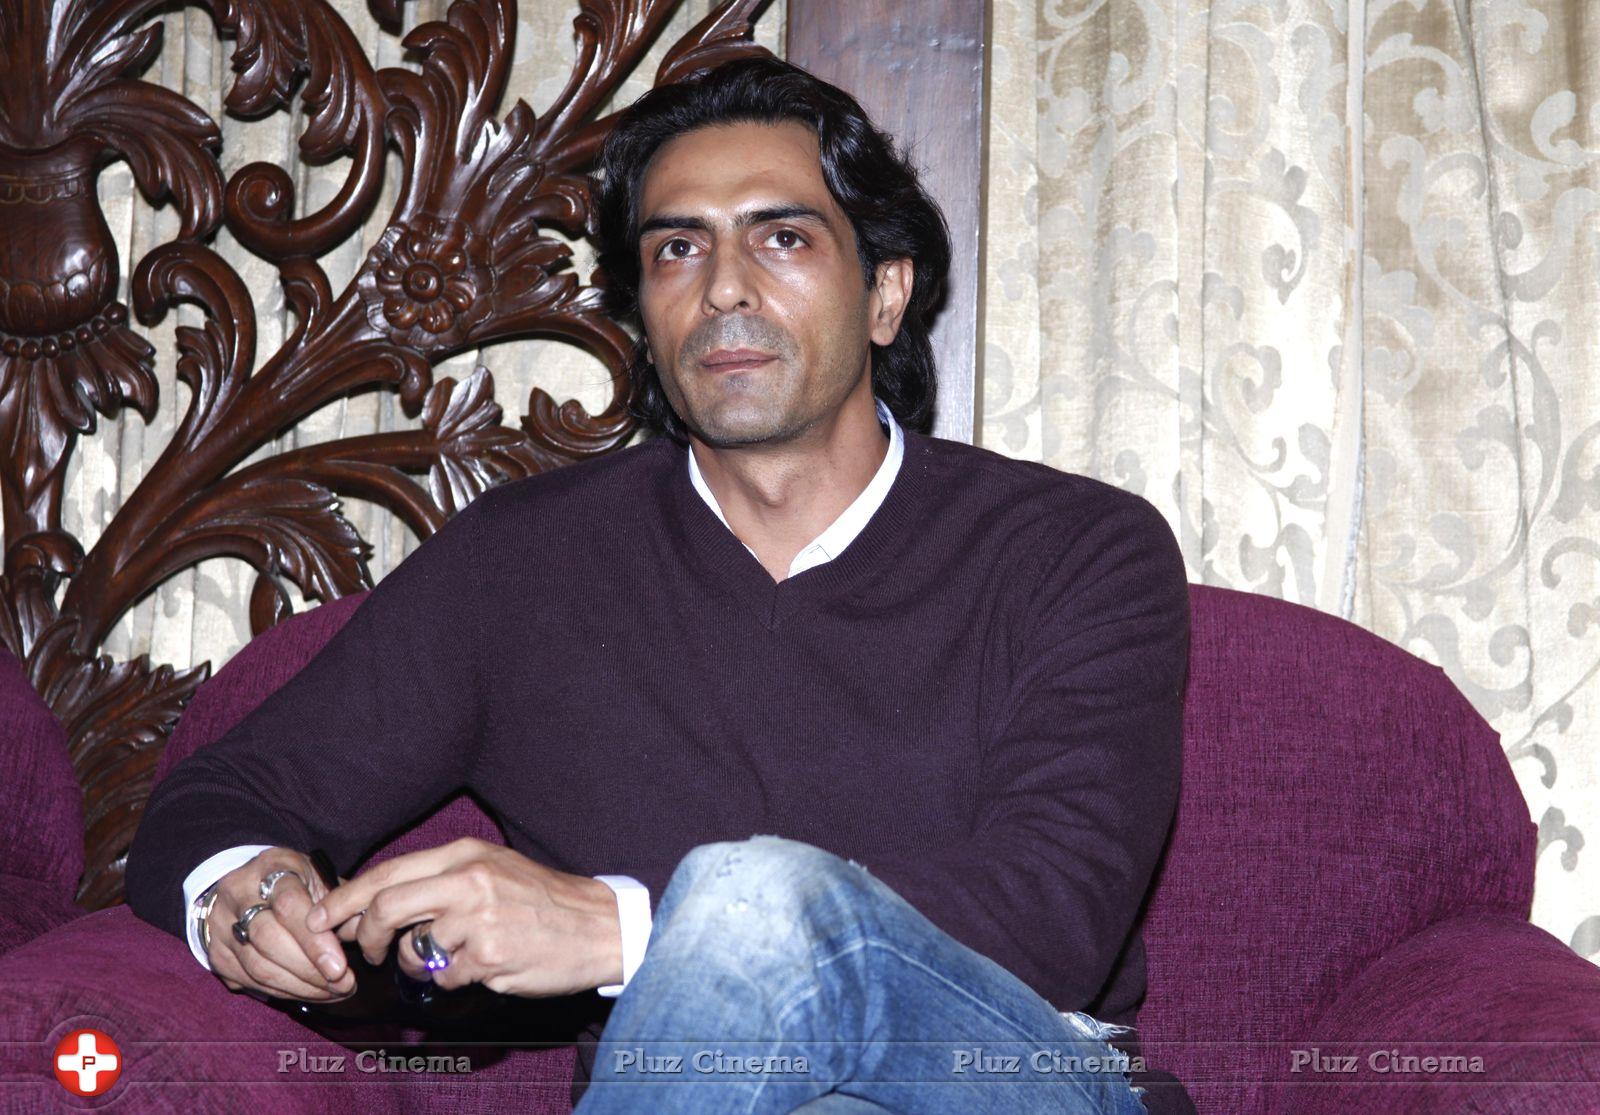 Arjun Rampal - Arjun Rampal meets Minister over elephant Sunder abuse case Photos | Picture 700205